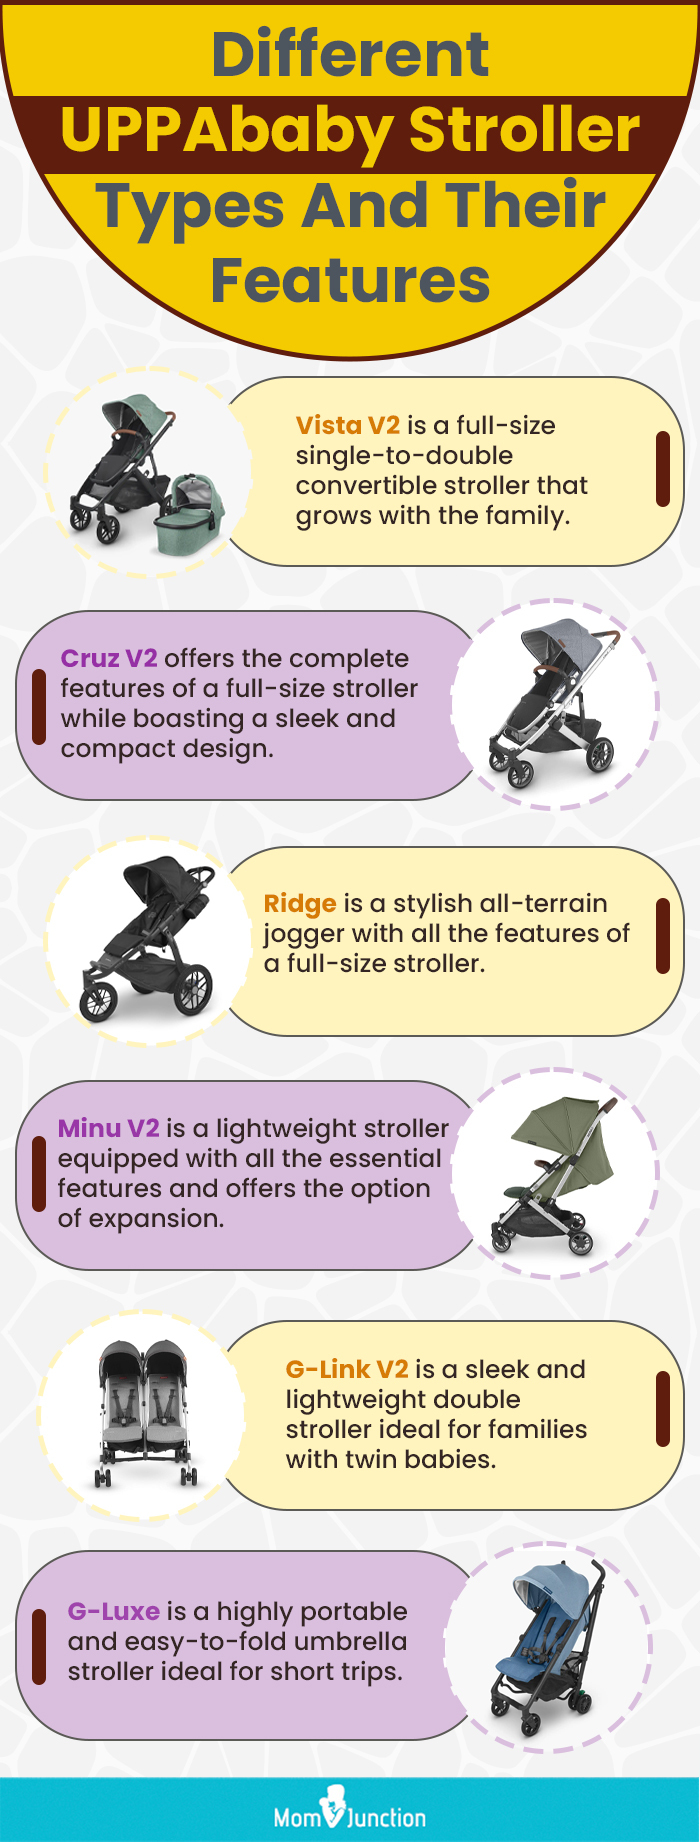 5 Best Uppababy Strollers For Portability And Safety In 2023